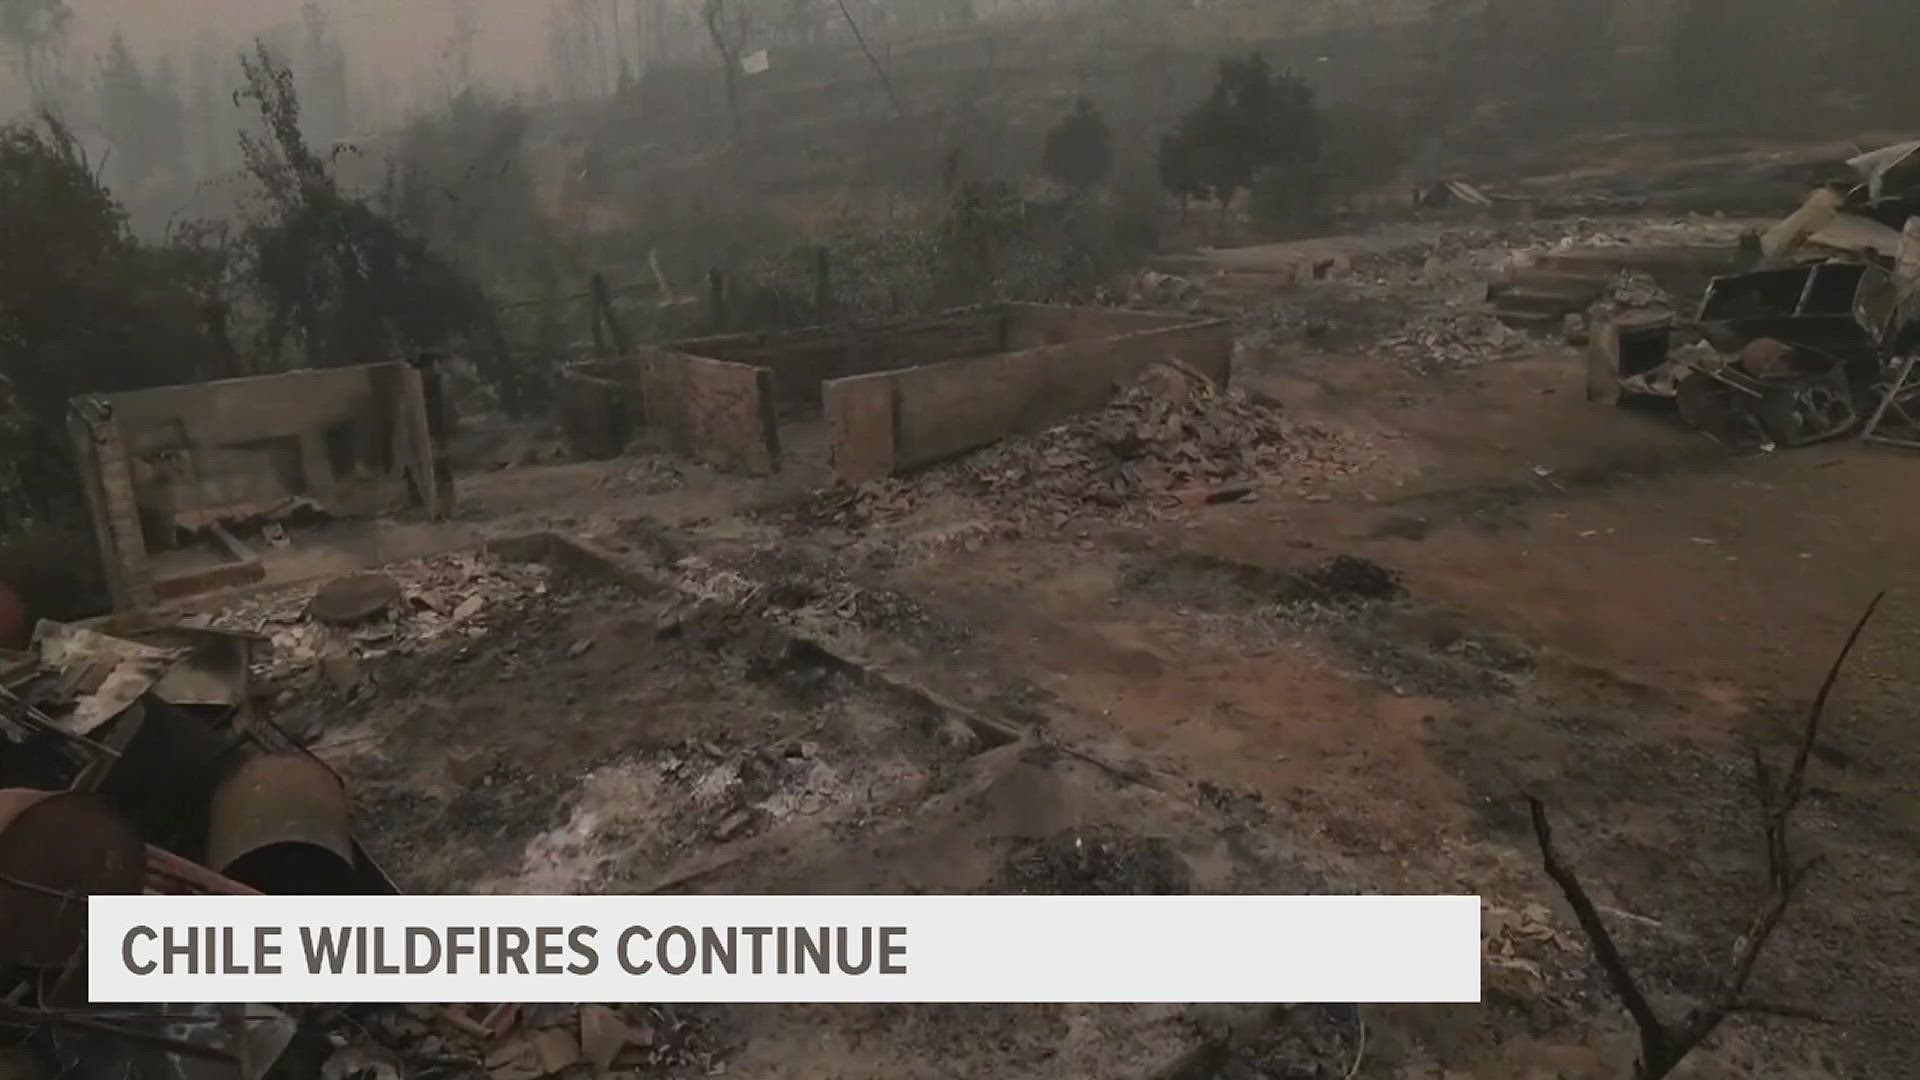 260 wildfires across Chile have killed at least 24 people. Nearly 1500 people have been evacuated.